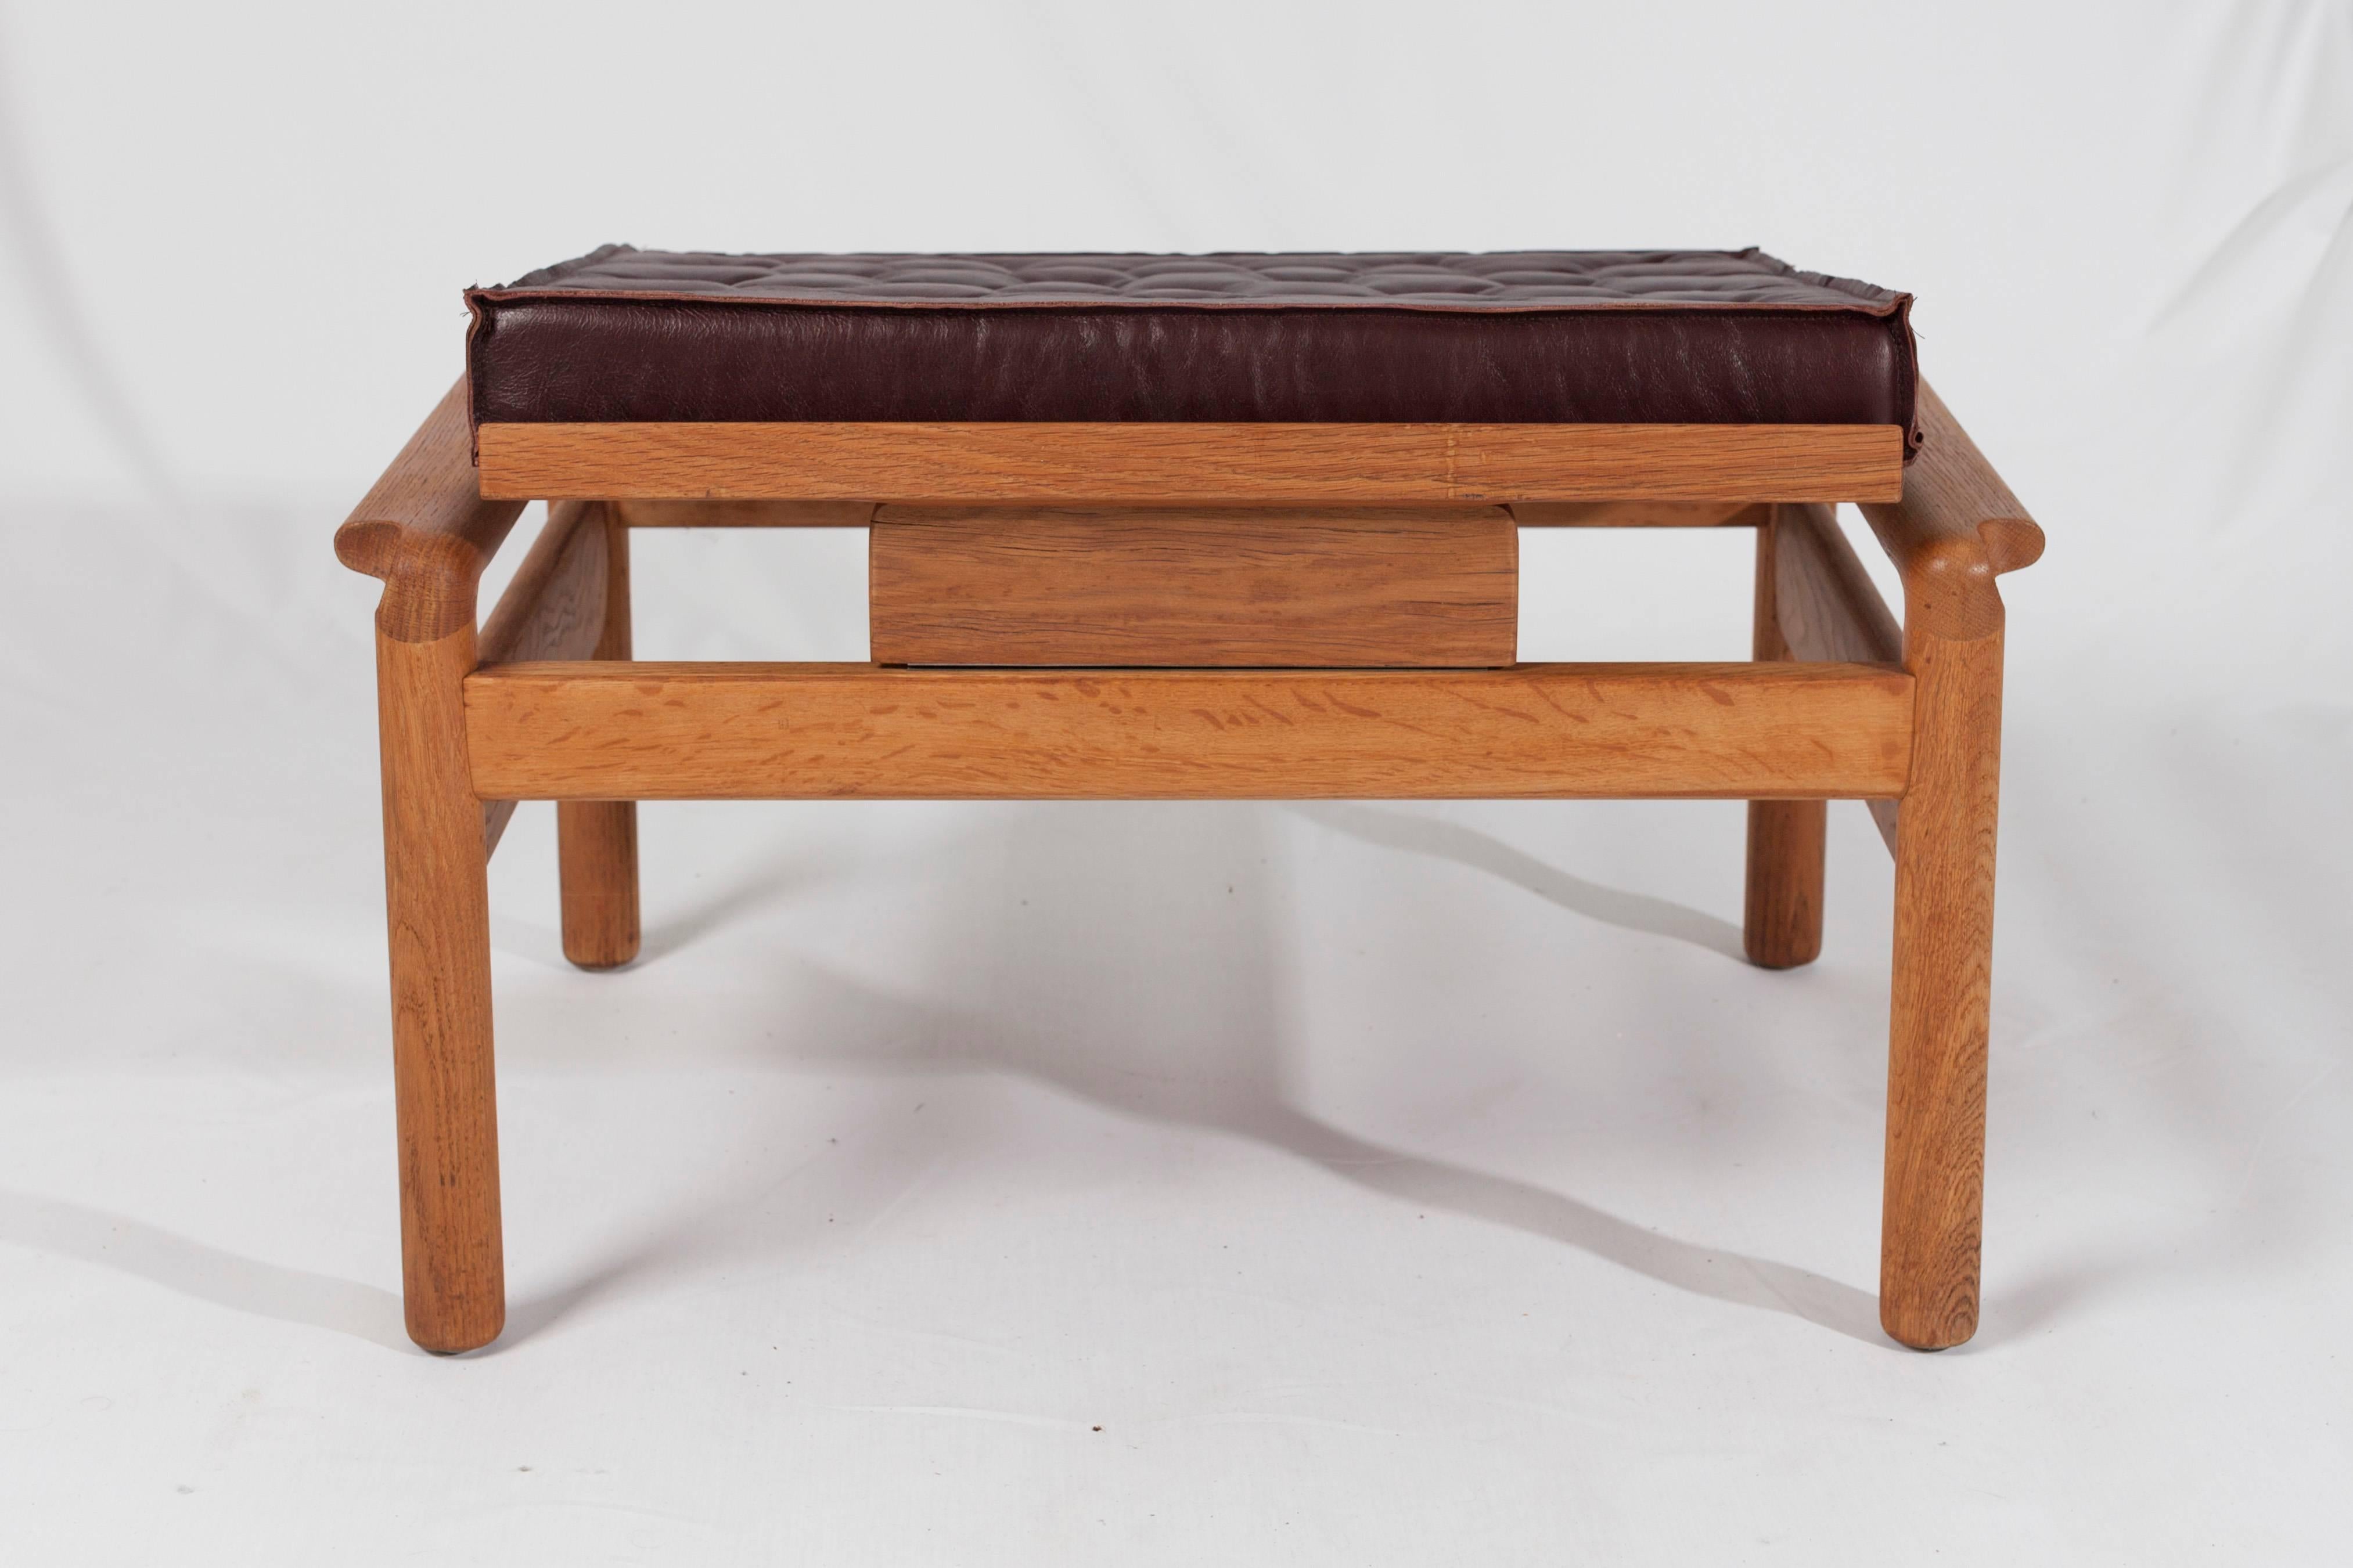 Set of two midcentury ottomans or footstools with padded leather cushions in the style of Hans Wegner.
Probably Scandinavian or otherwise Dutch design.
The top may be reclined for extra leg comfort.